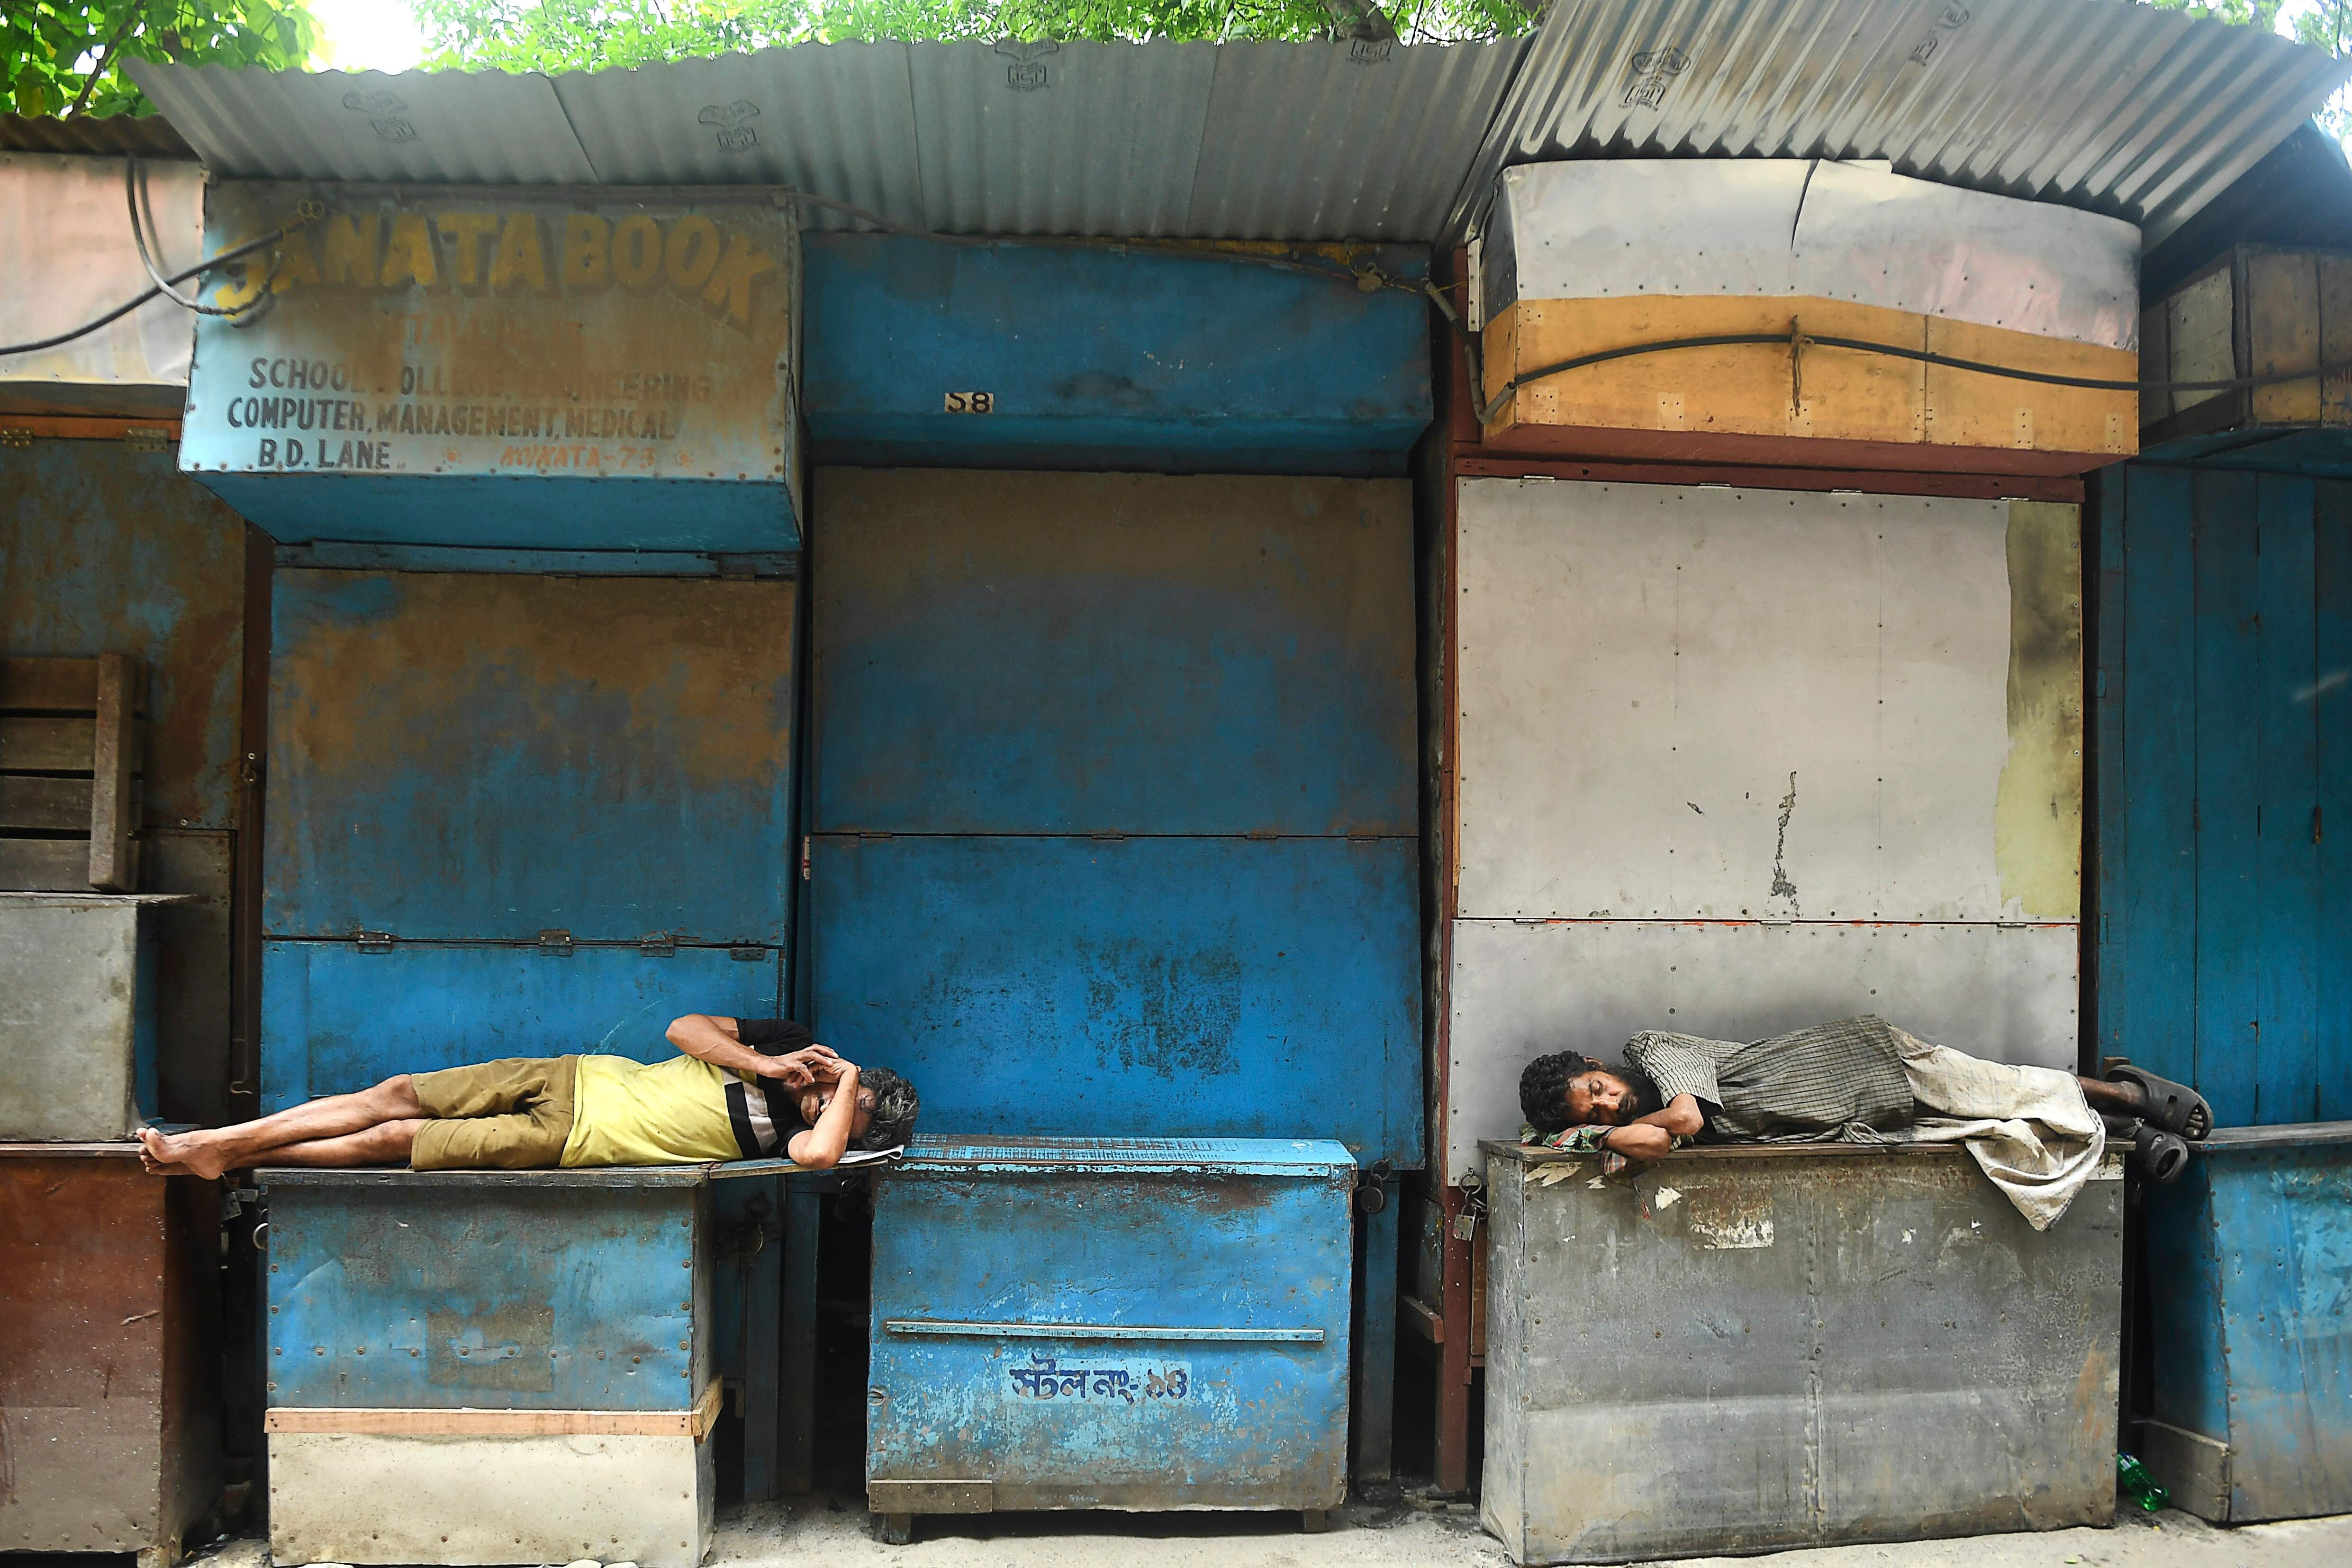 Men resting in front of closed book stalls during a coronavirus lockdown in Kolkata on August 31, 2020. Photo: AFP